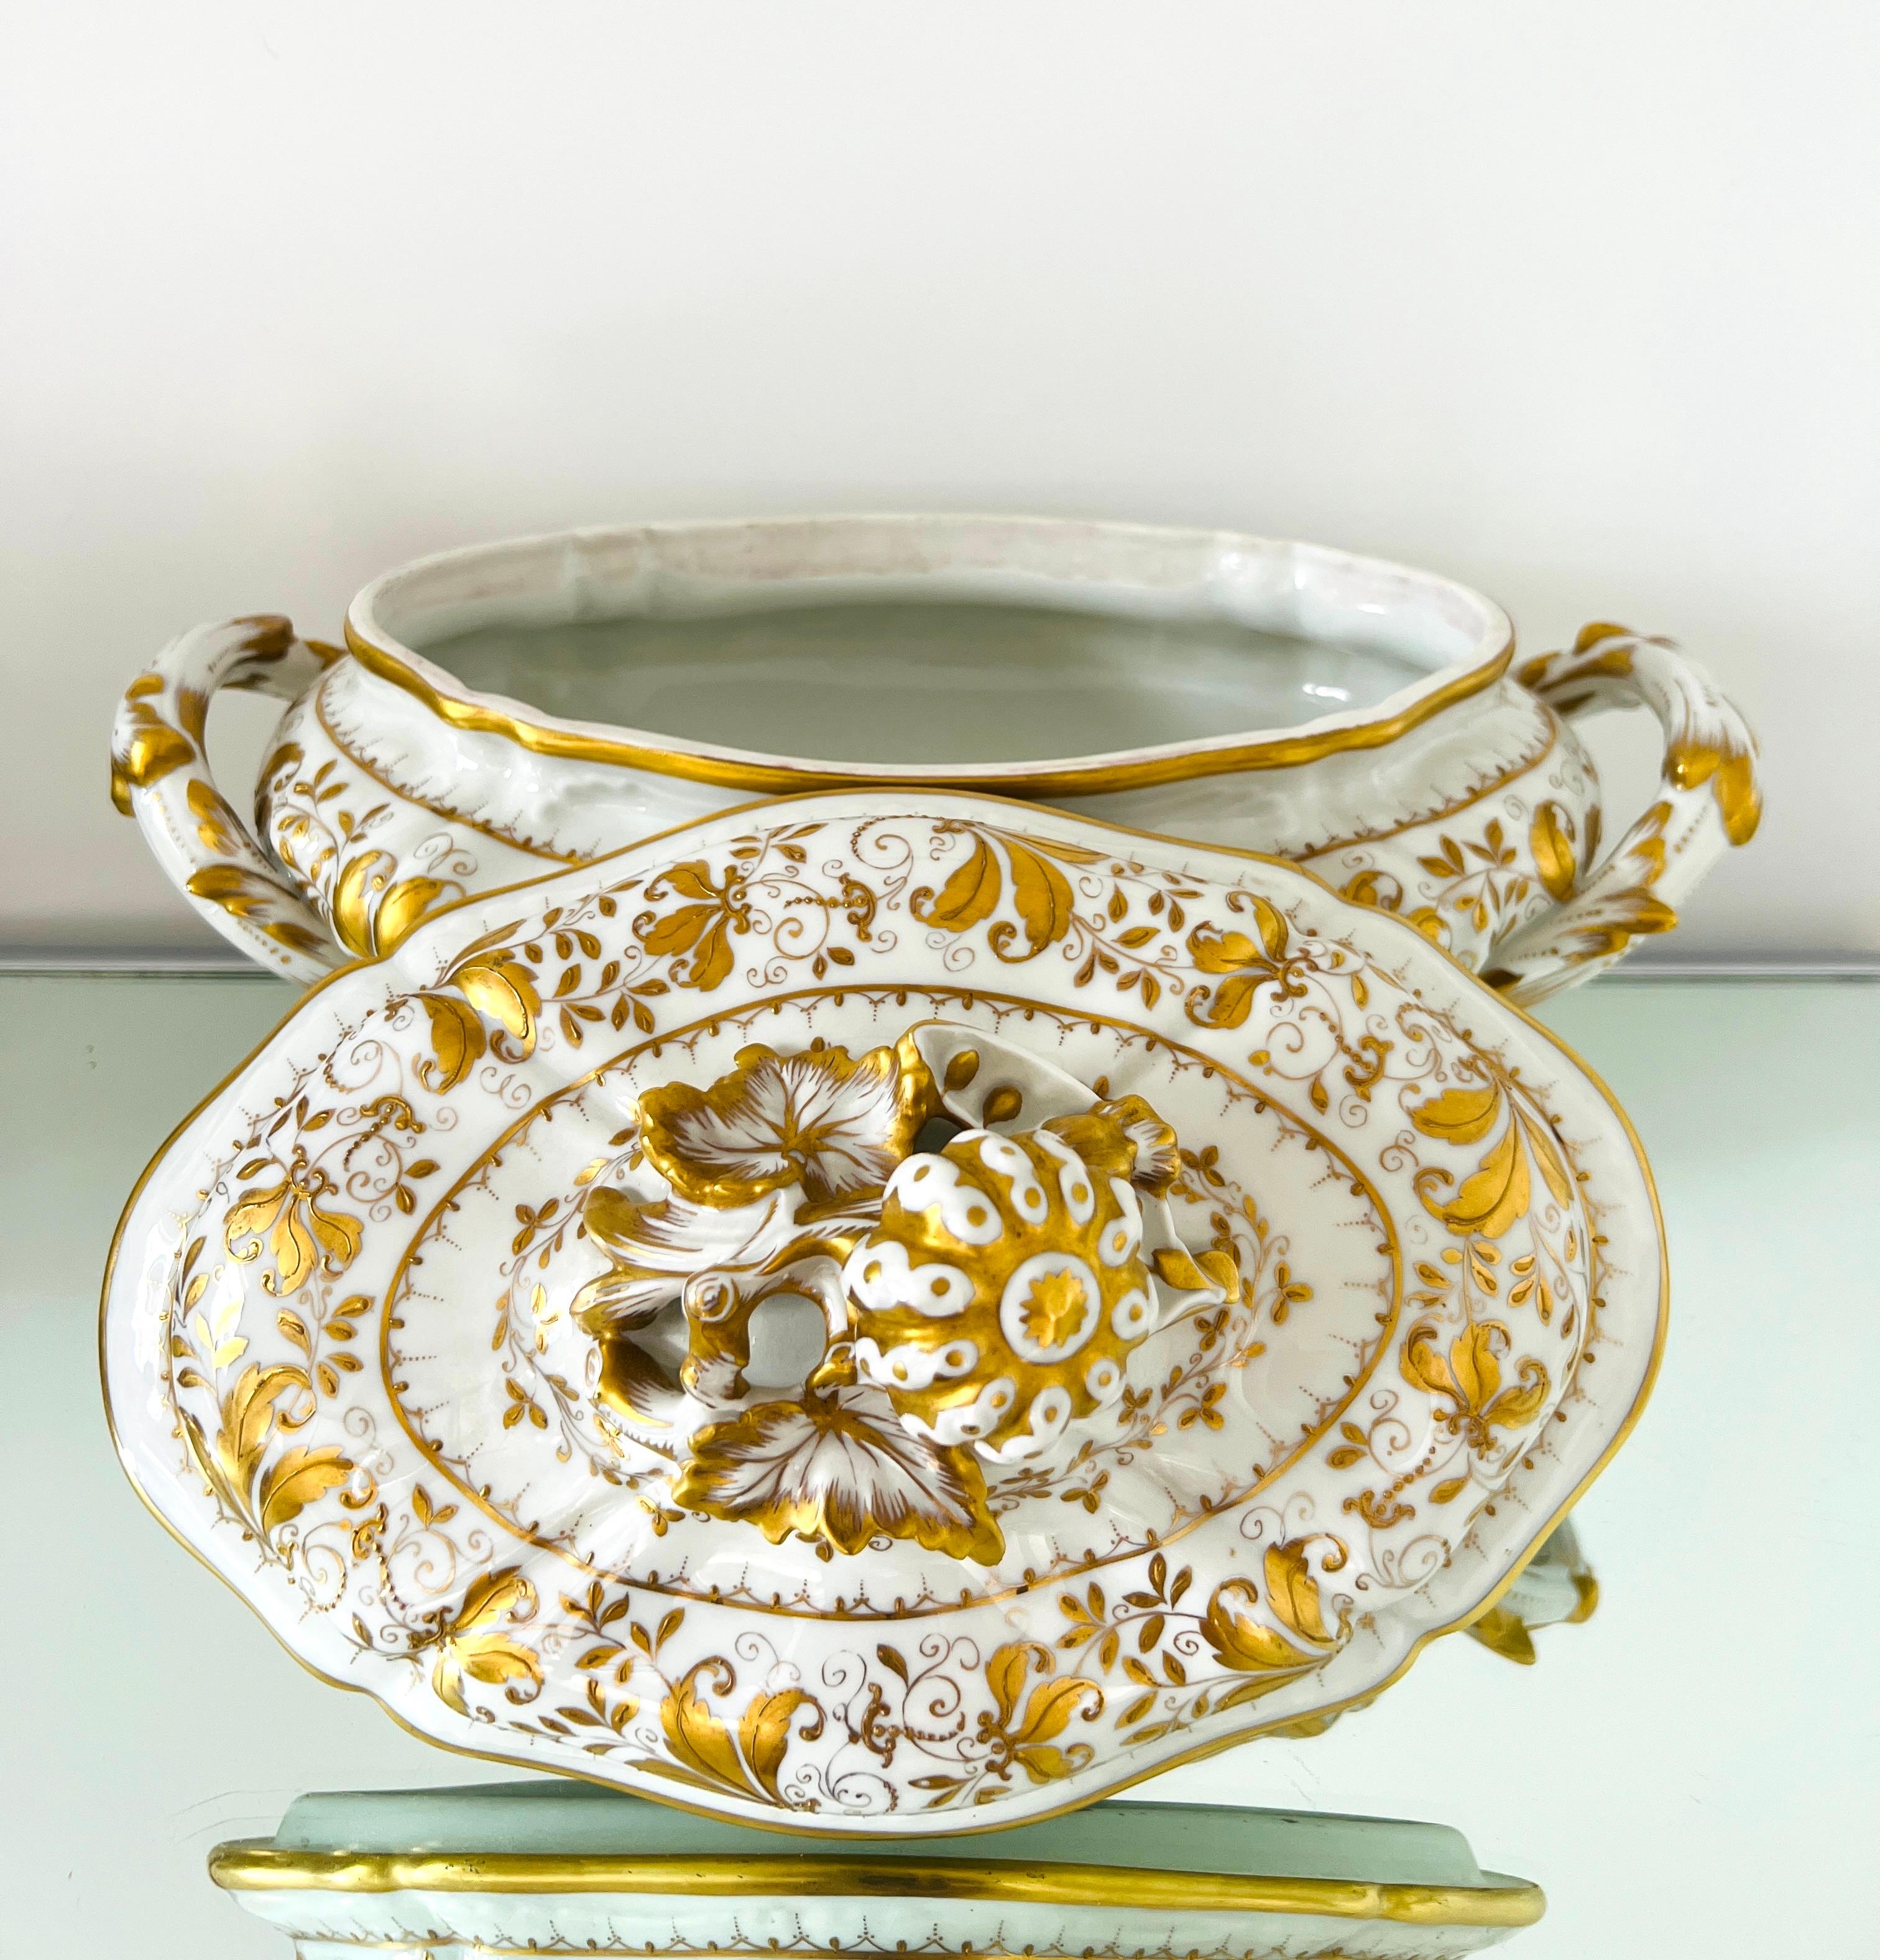 Mid-20th Century Le Tallec Hand Painted Porcelain Tureen with Gold Leaf Motifs, Paris, circa 1960 For Sale